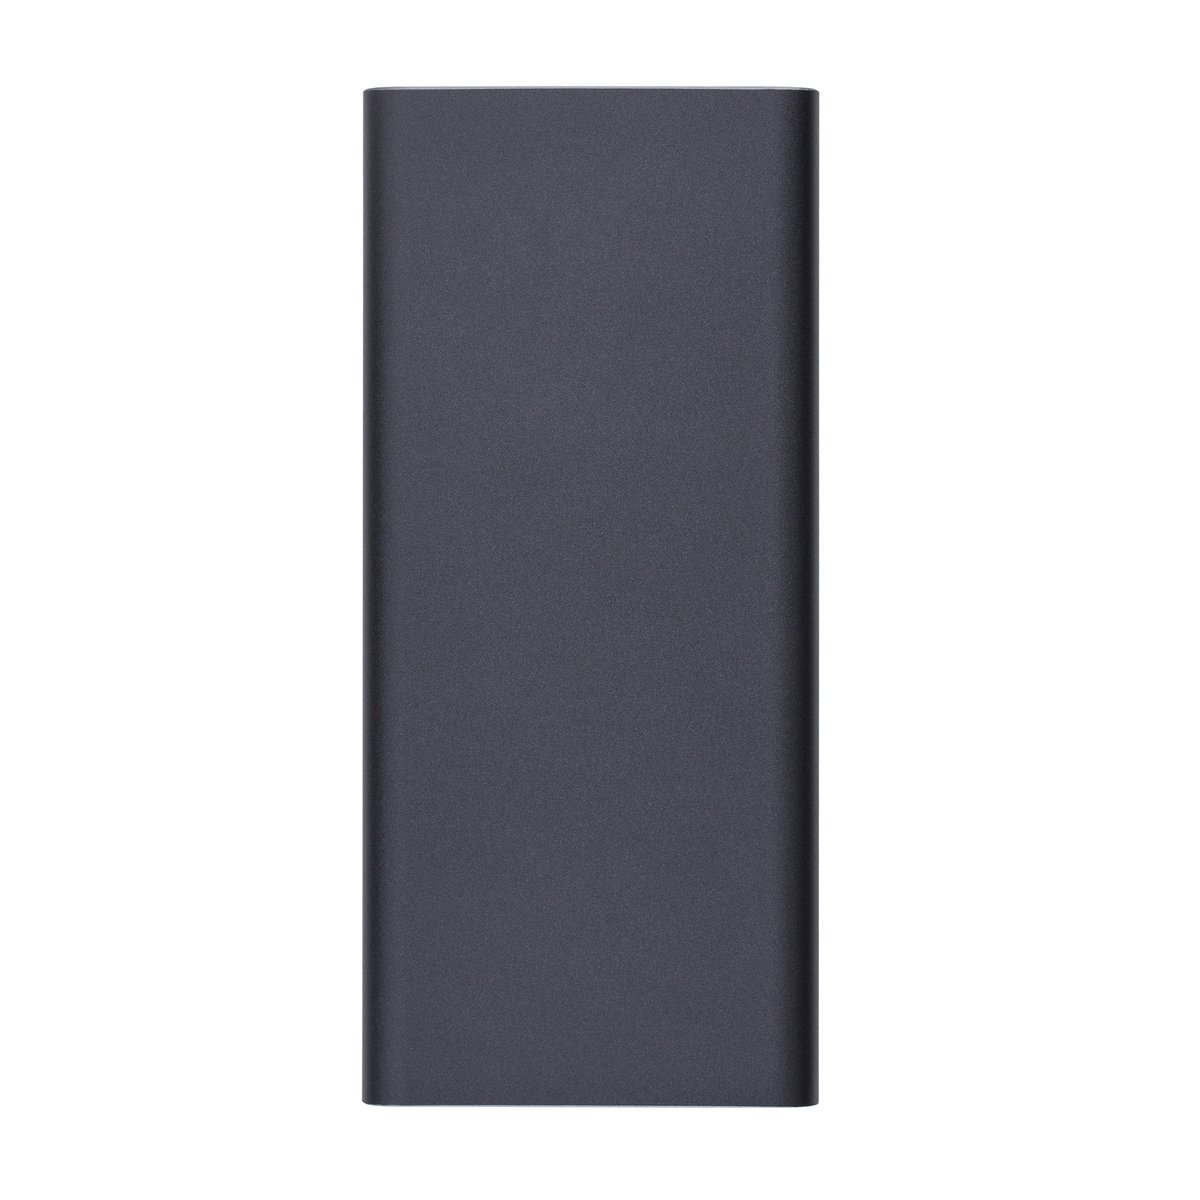 Powerbank with Fast Charge and Power Delivery REEVES-GUYMON dark grey 20000 mAh